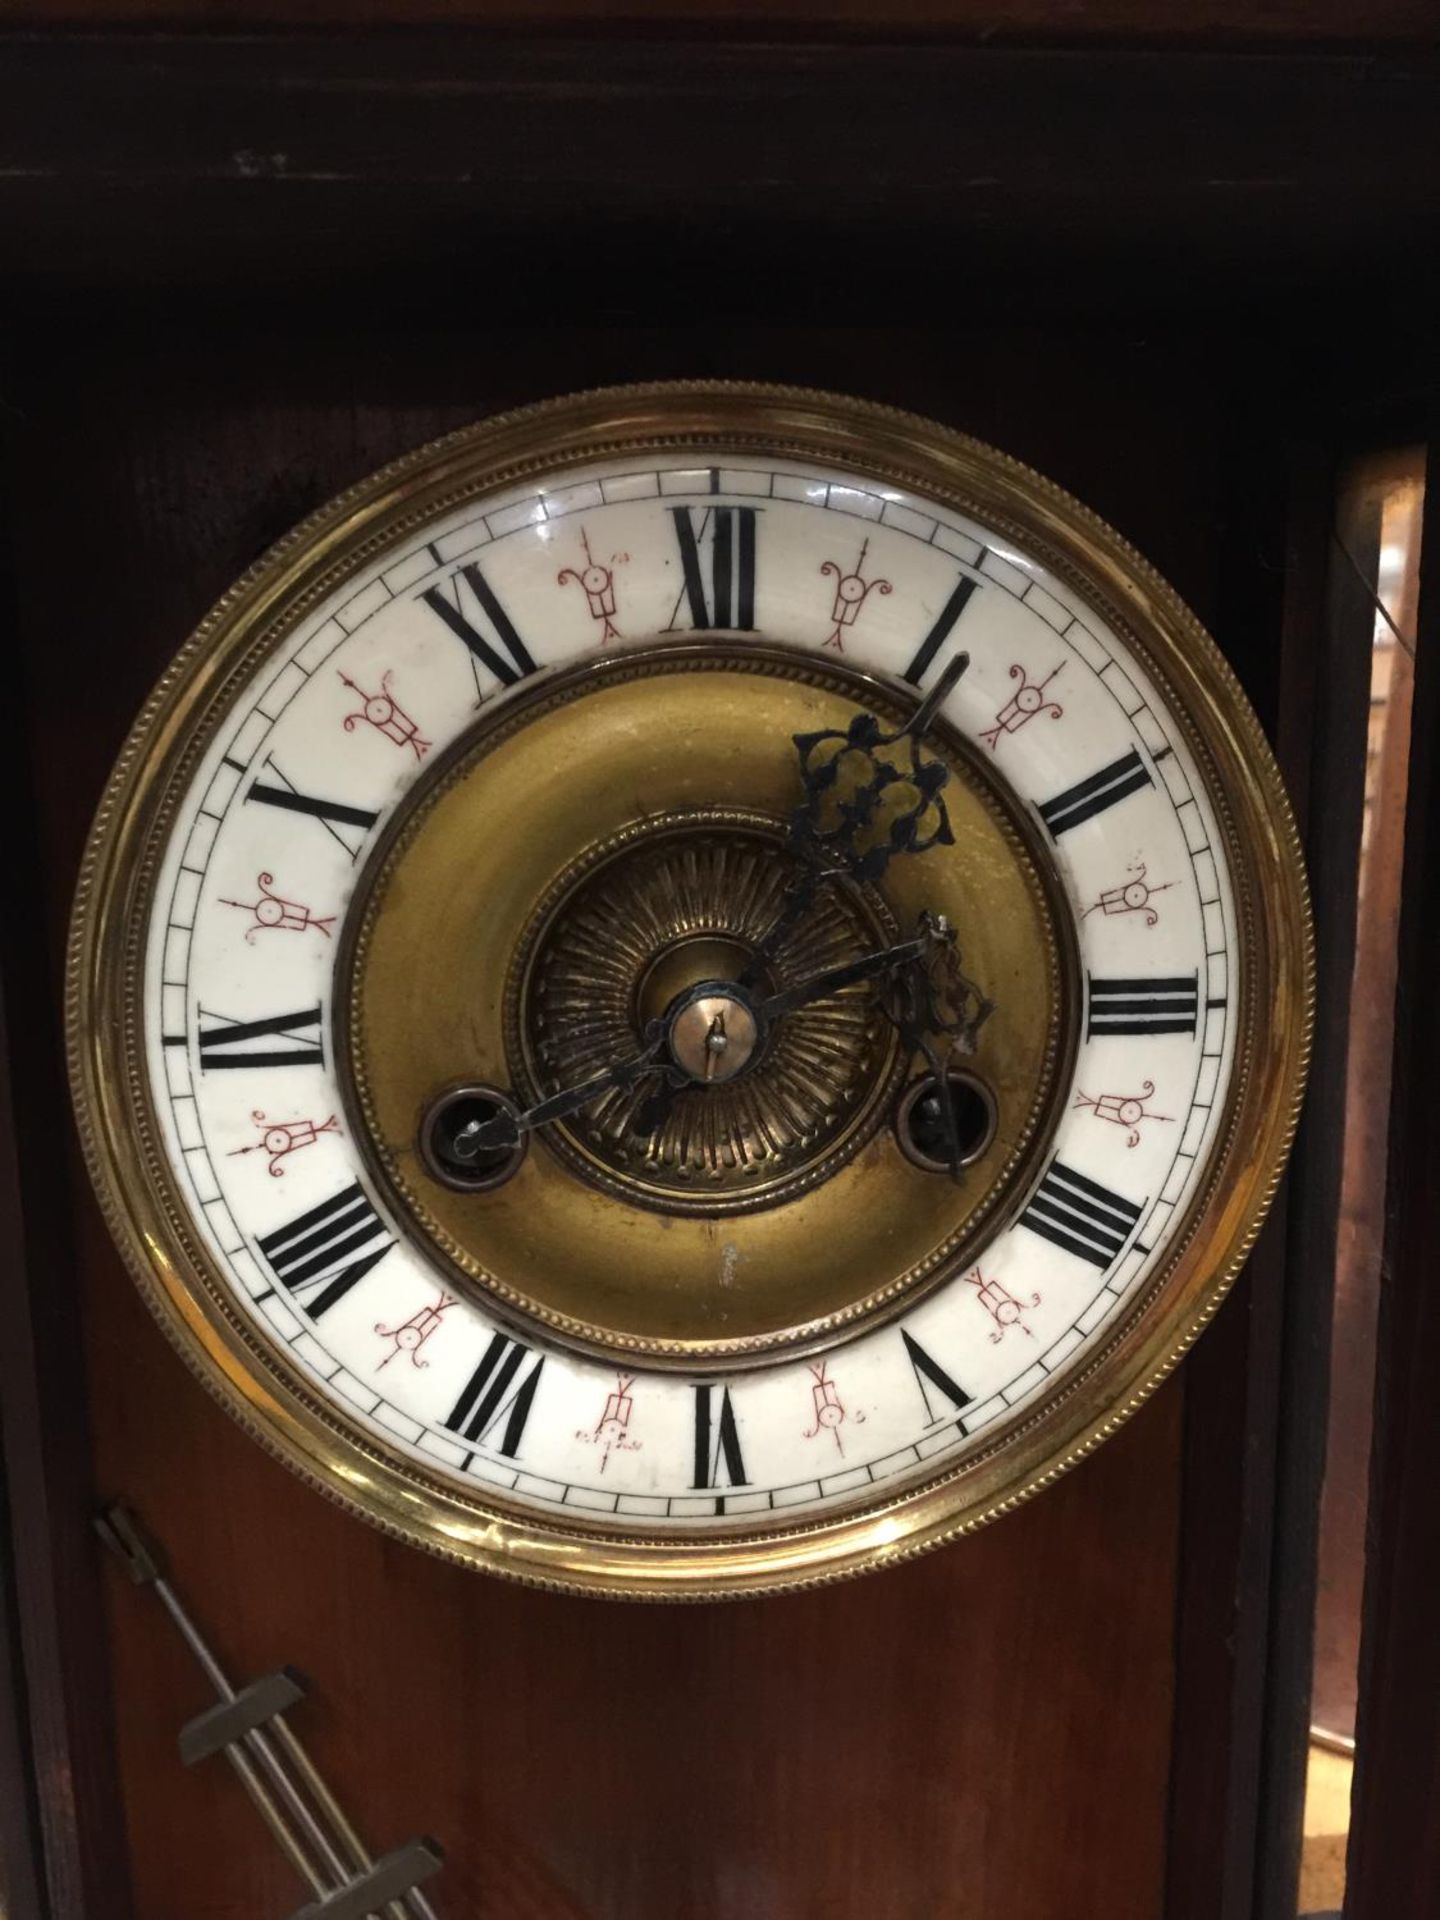 A LATE 19TH CENTURY VIENNA WALL CLOCK WITH ROMAN NUMERALS ON BRASS FACE AND PENDULUM WITH KEY H: - Image 4 of 5